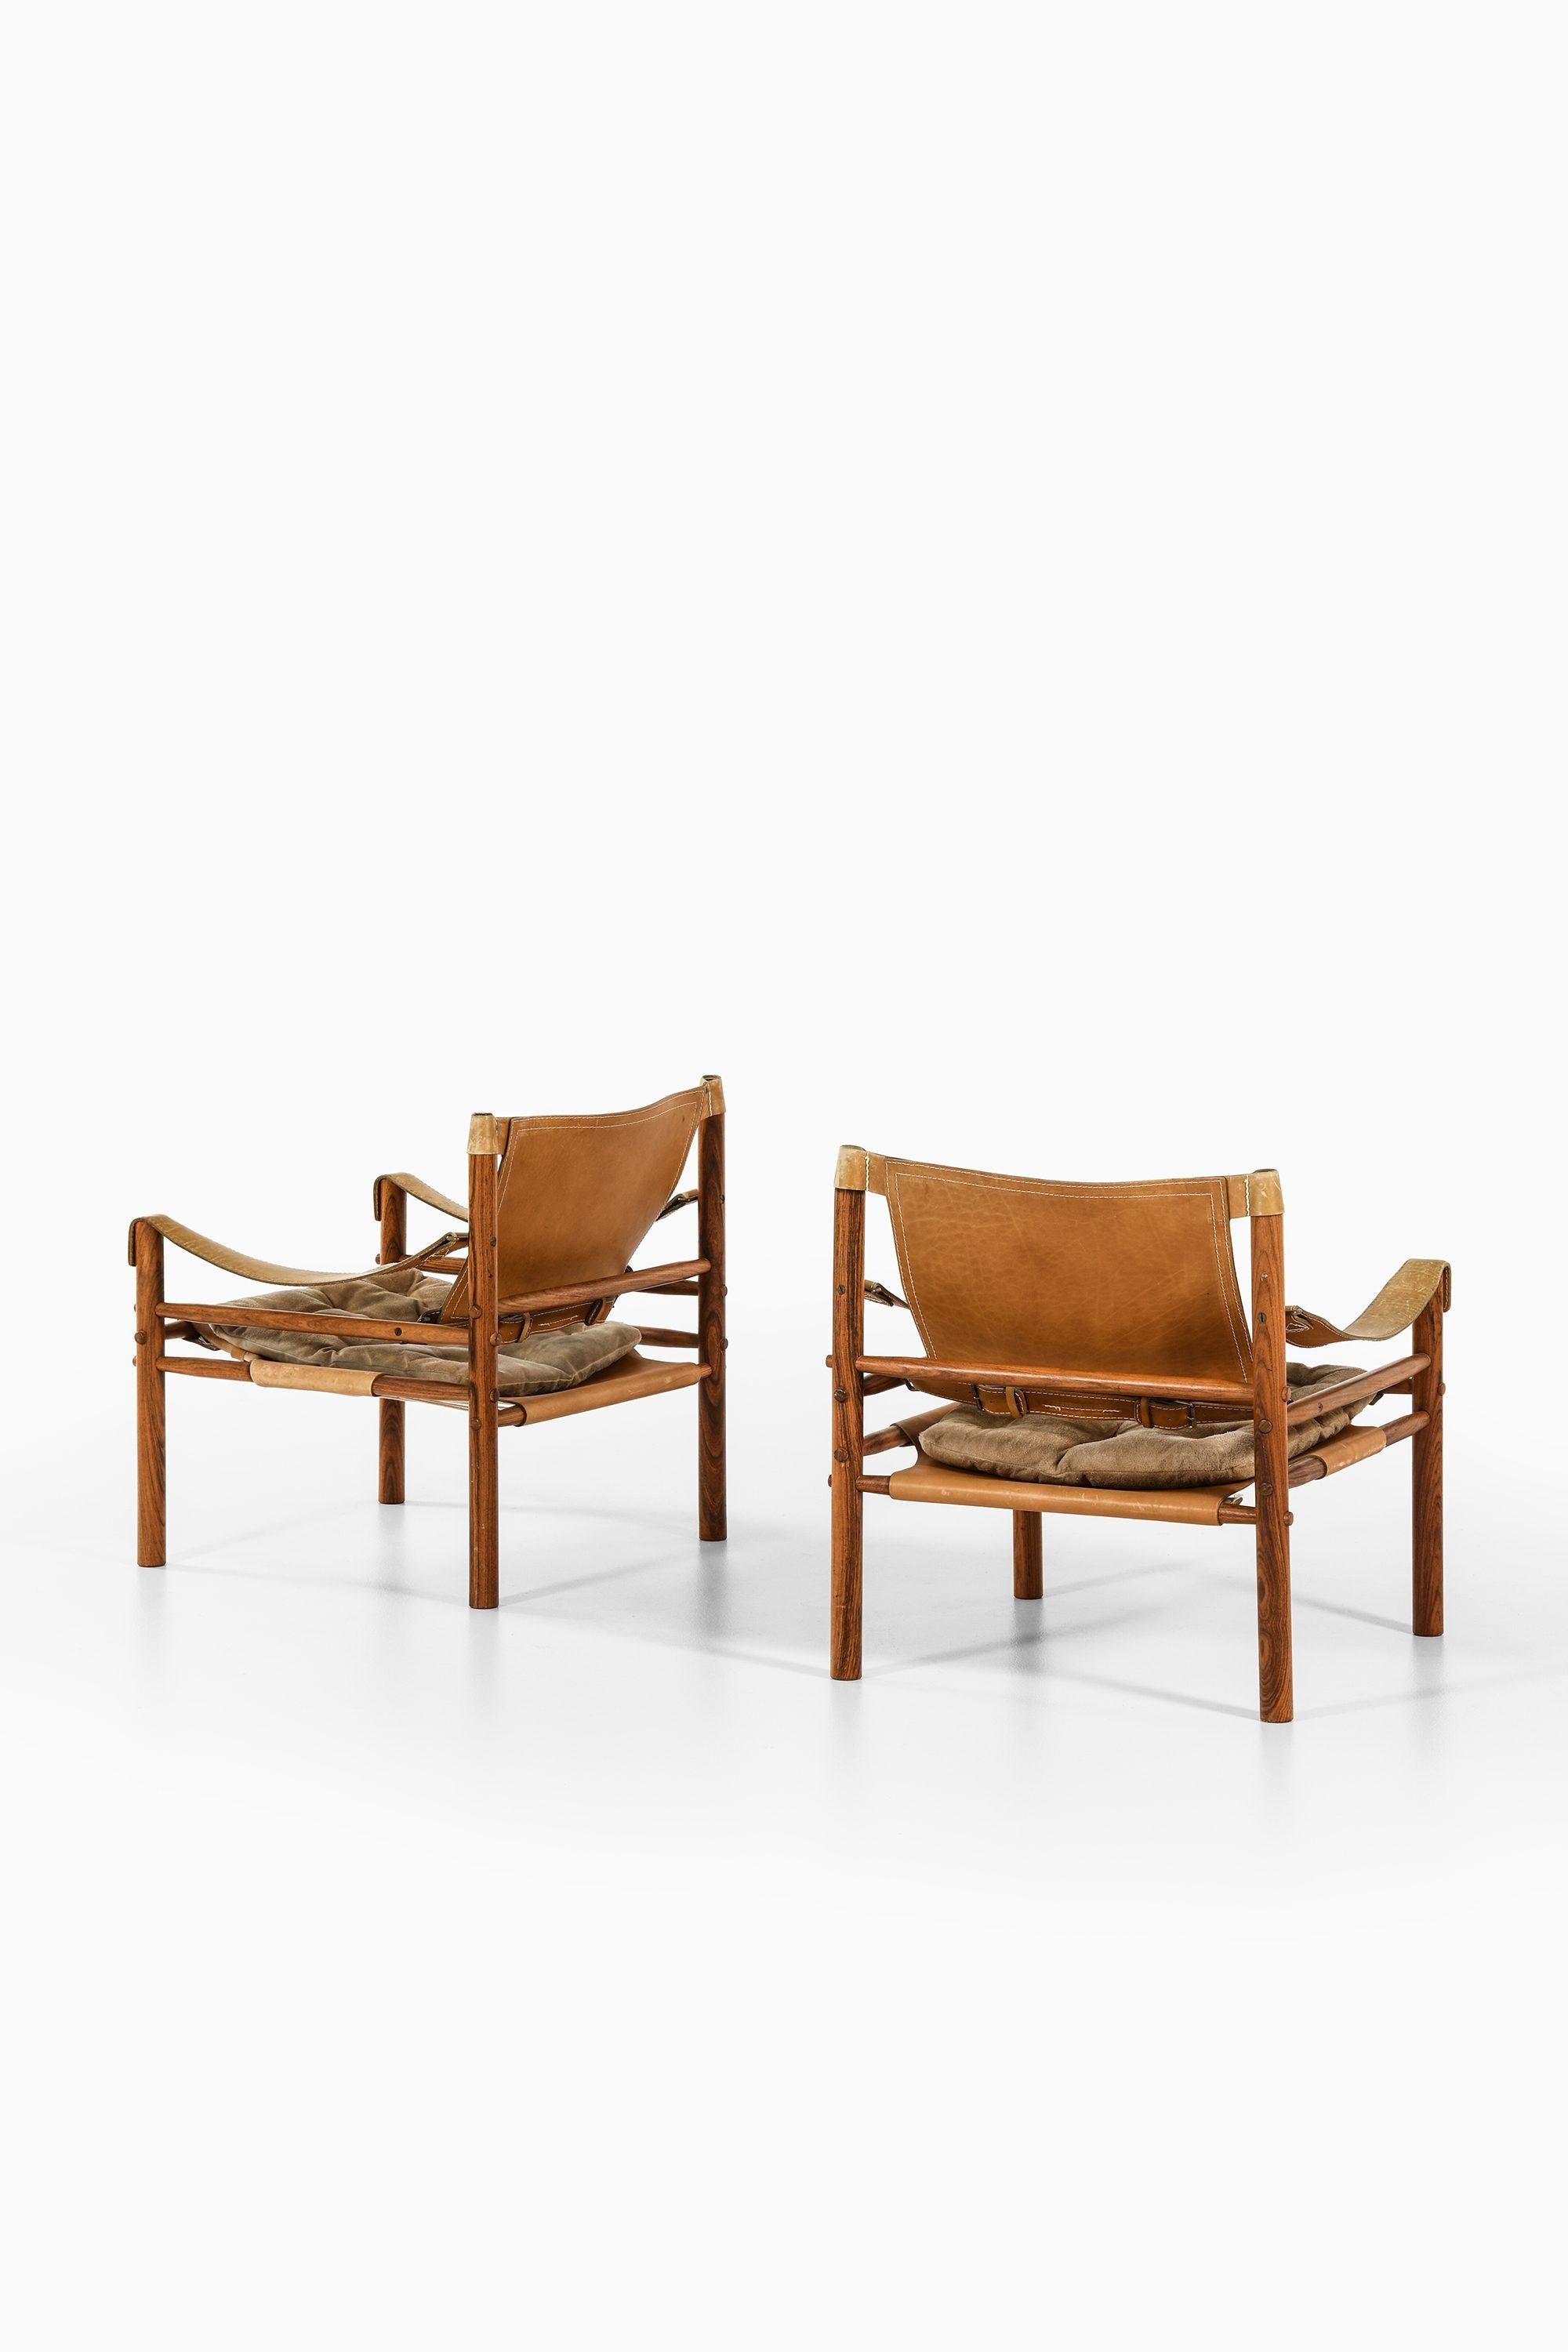 Easy chairs Model Sirocco designed by Arne Norell, 1964

Additional Information:
Material: Rosewood, cognac brown leather and original suede
Style: Midcentury, Scandinavian
Very rare easy chairs model Sirocco
Produced by Arne Norell AB in